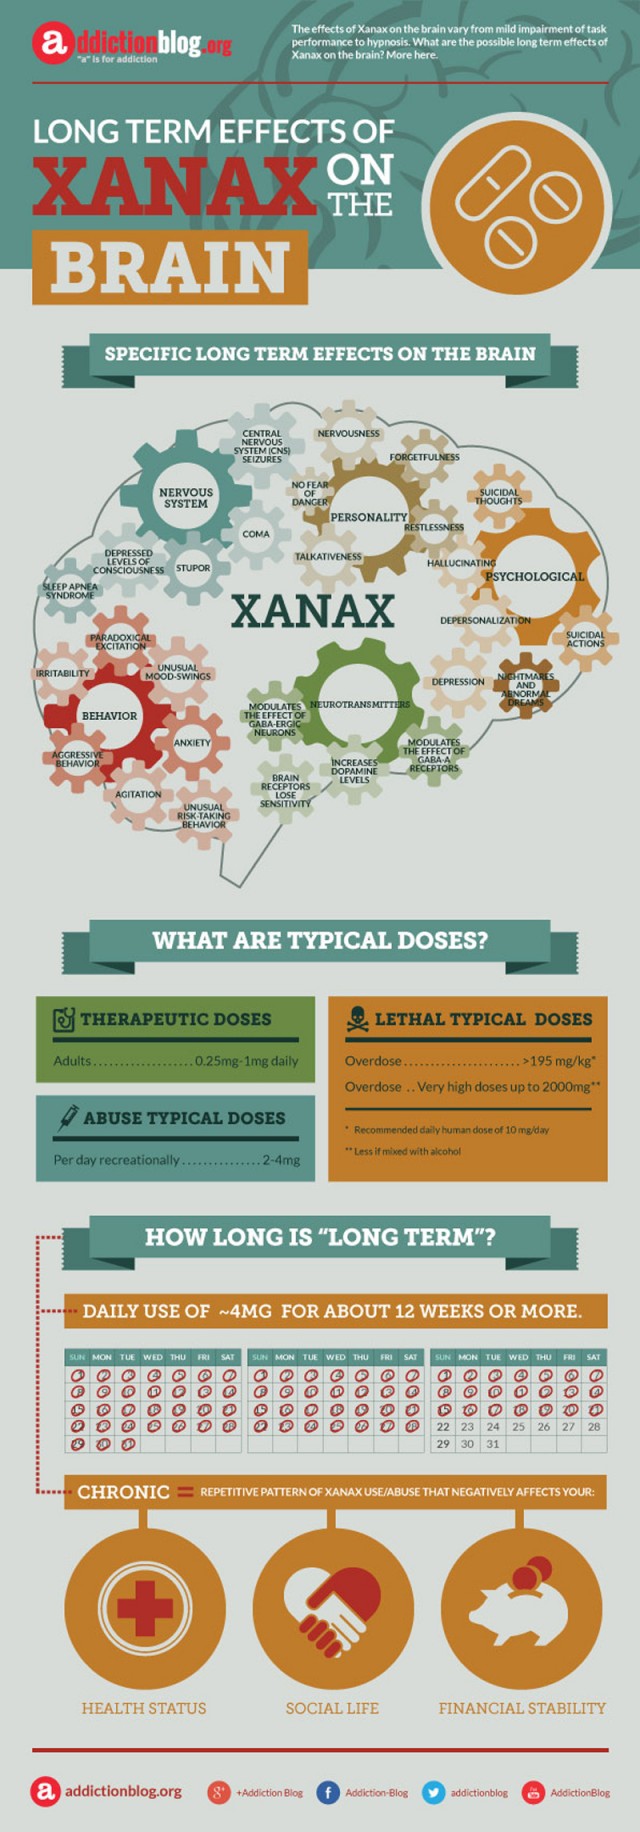 Long term effects of Xanax on the brain (INFOGRAPHIC)